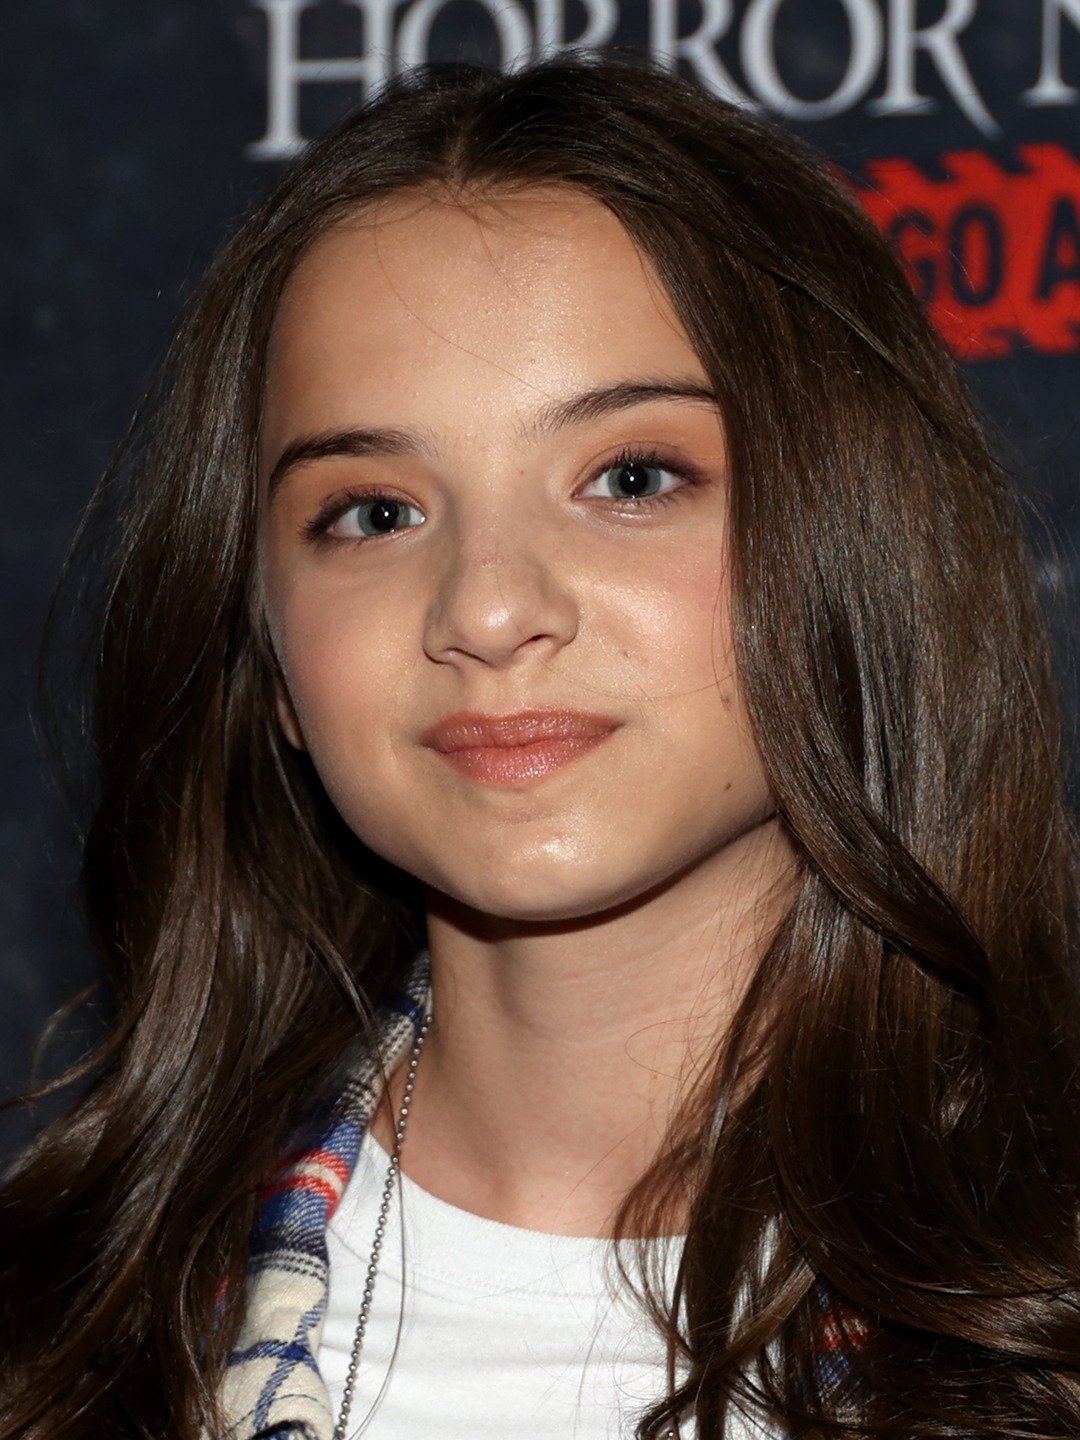 An Interview with Toy Story 4's Madeleine McGraw, Who Plays Bonnie